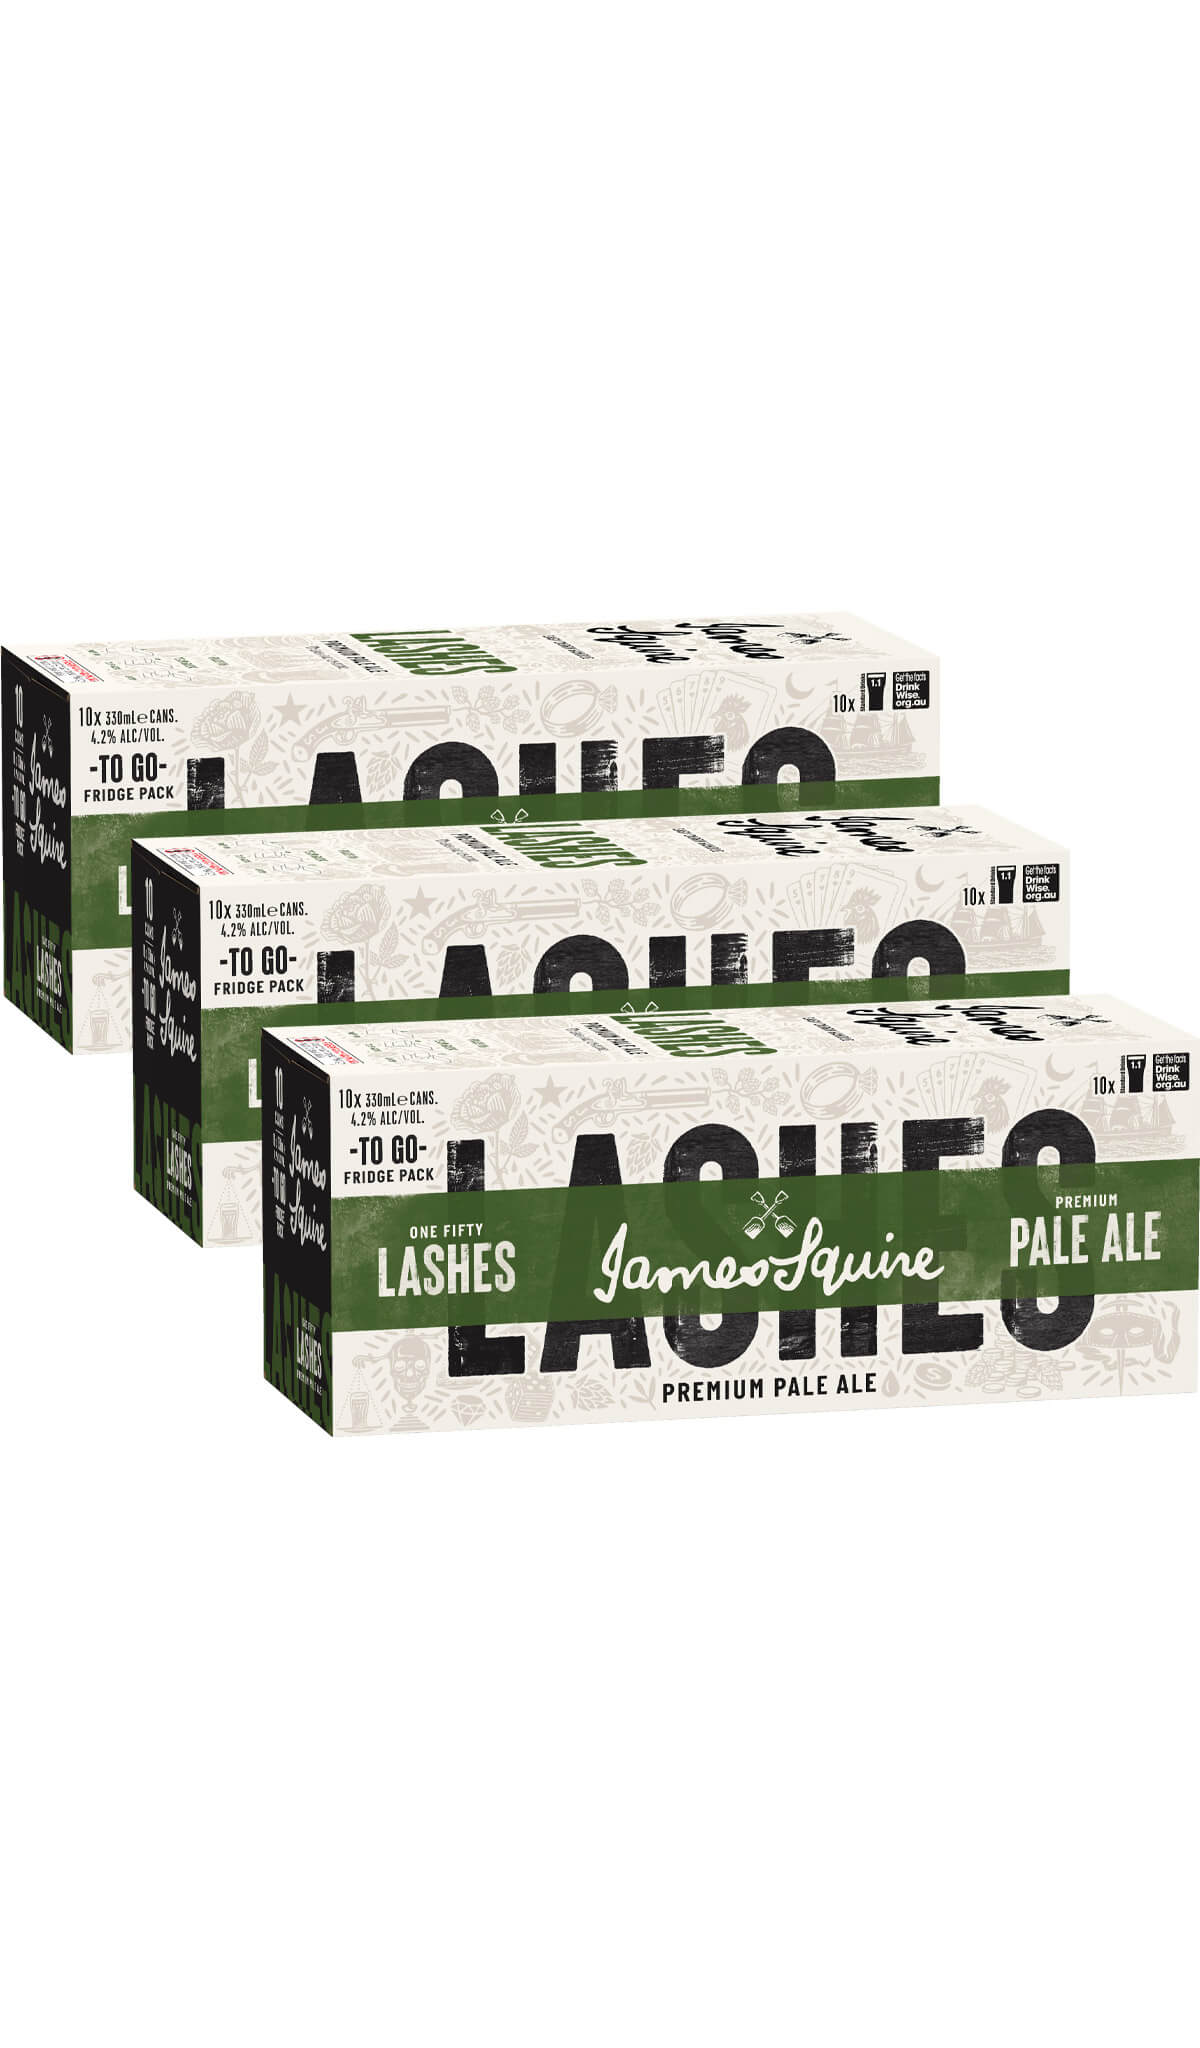 Find out more, explore the range and buy James Squire One Fifty Lashes Pale Ale 3x10x330mL Cans available online at Wine Sellers Direct - Australia's independent liquor specialists.